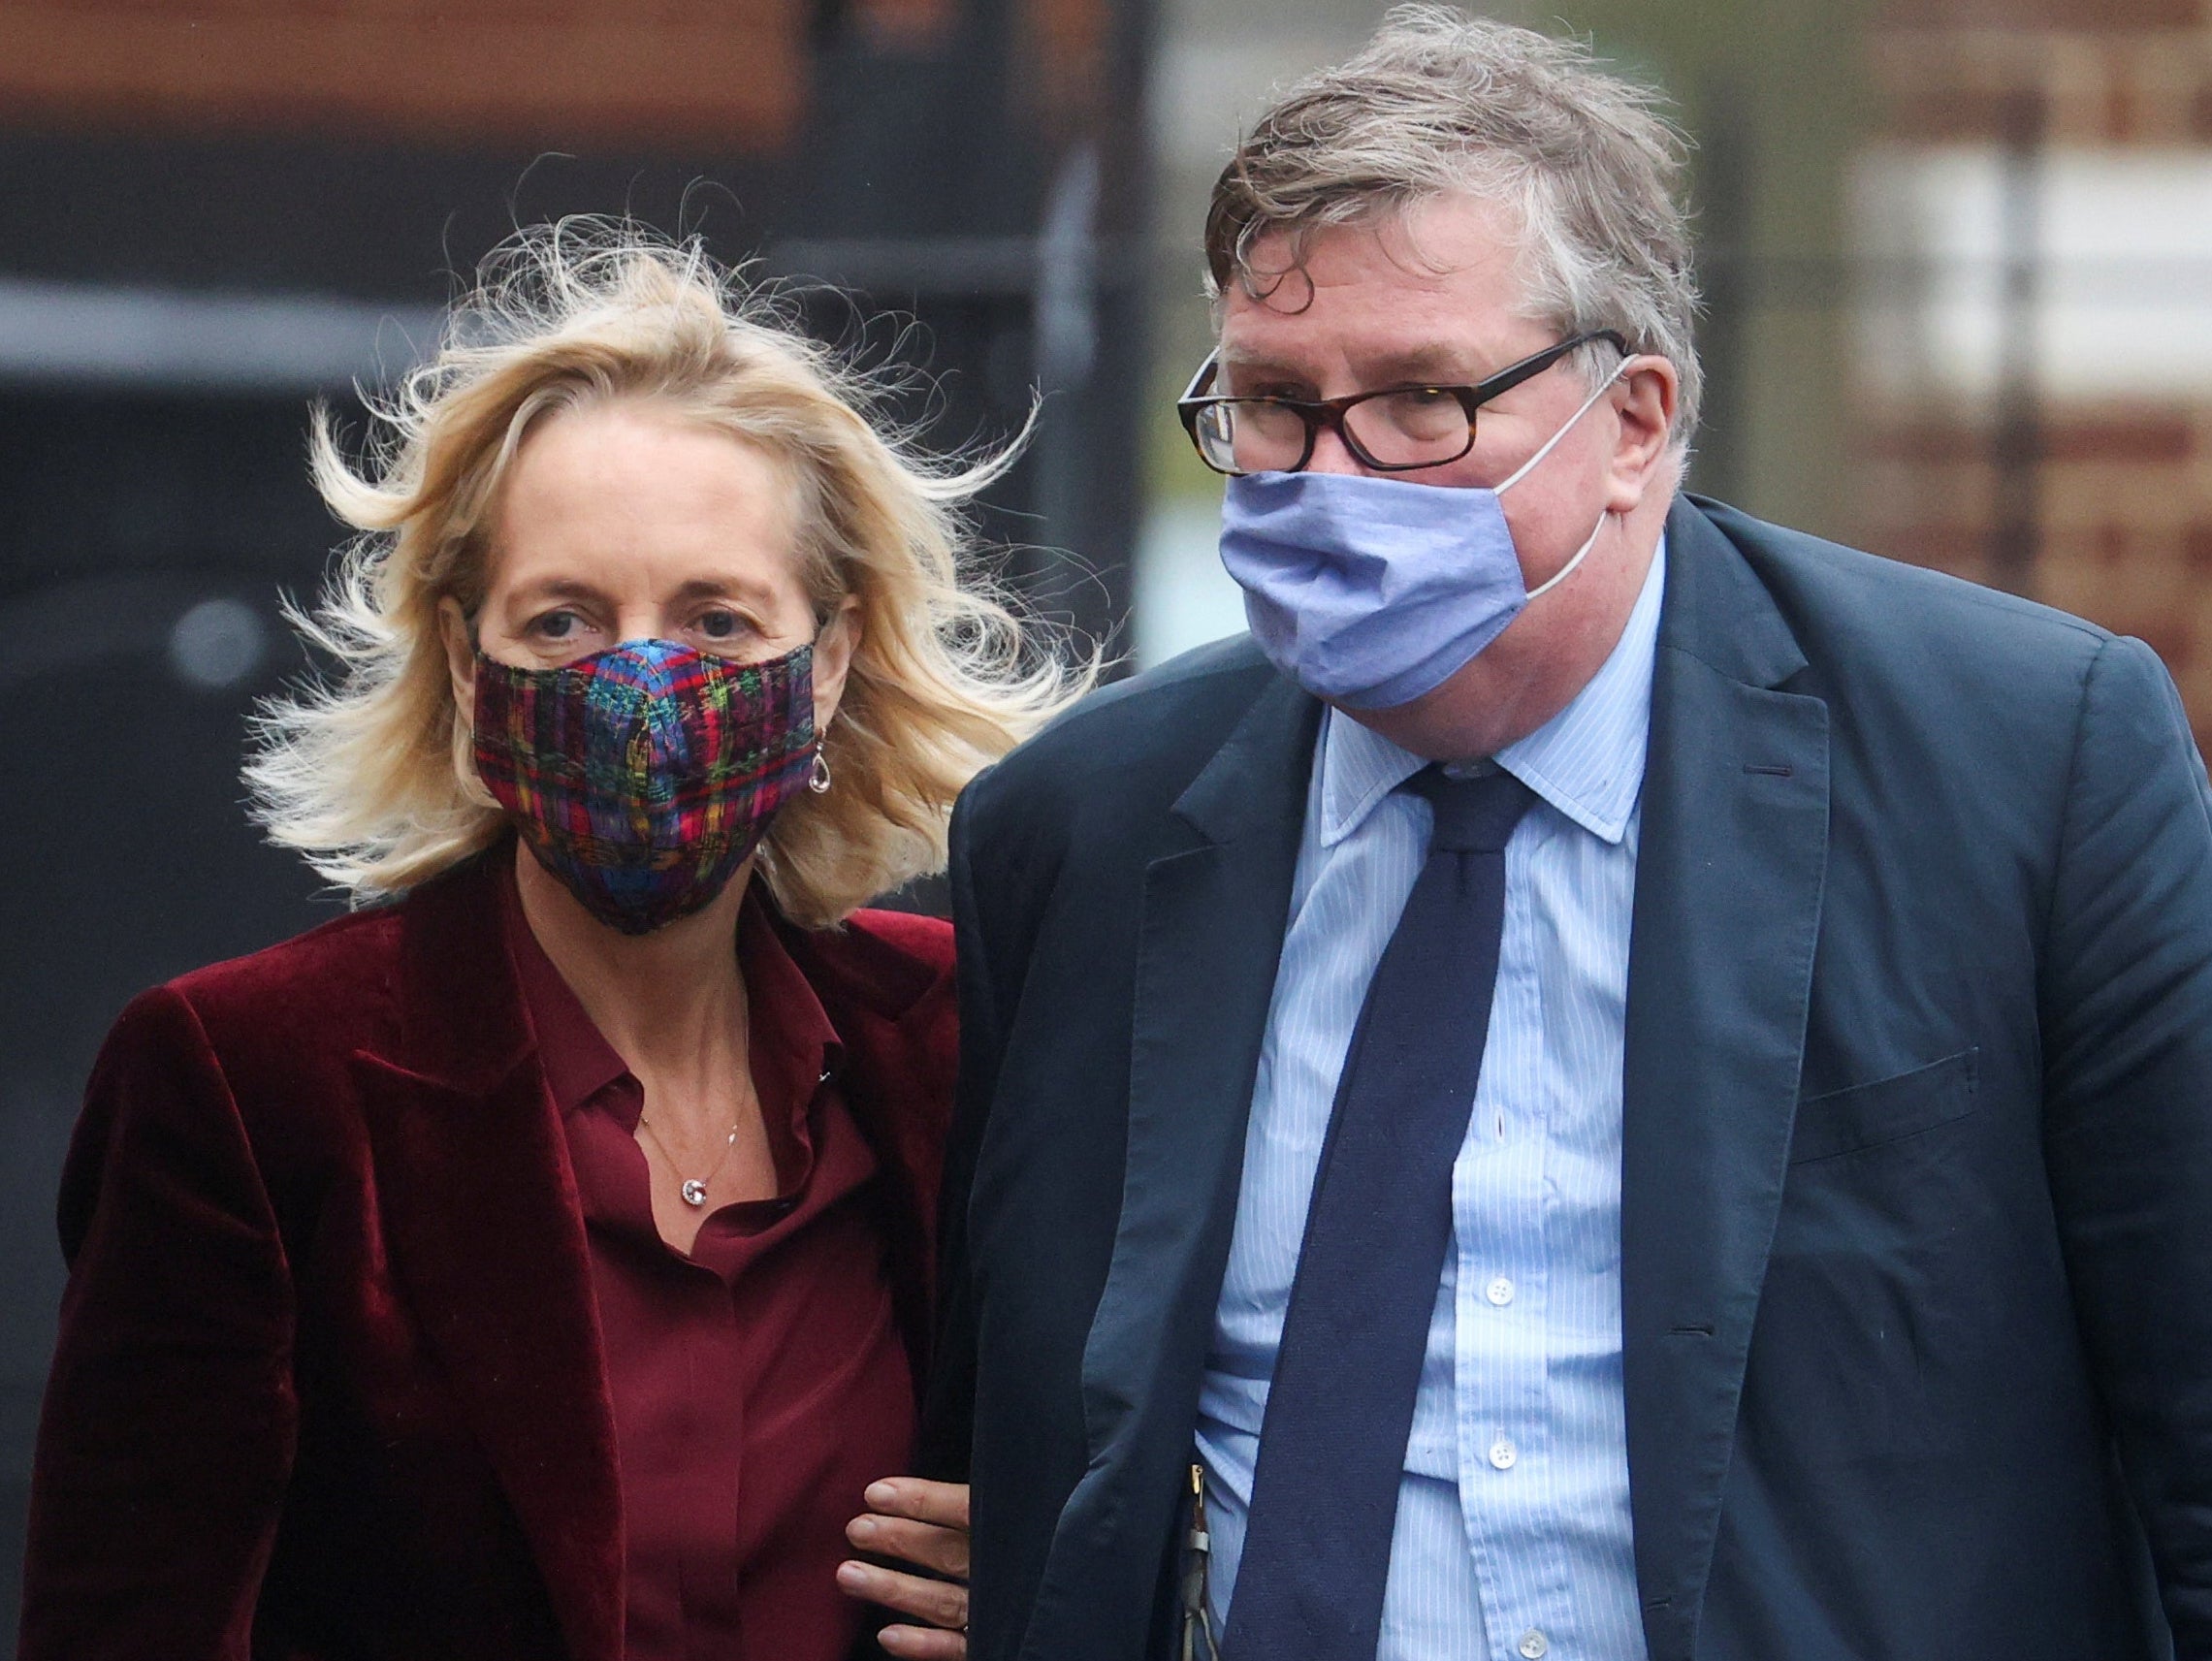 Crispin Odey was cleared of indecent assault in March 2021